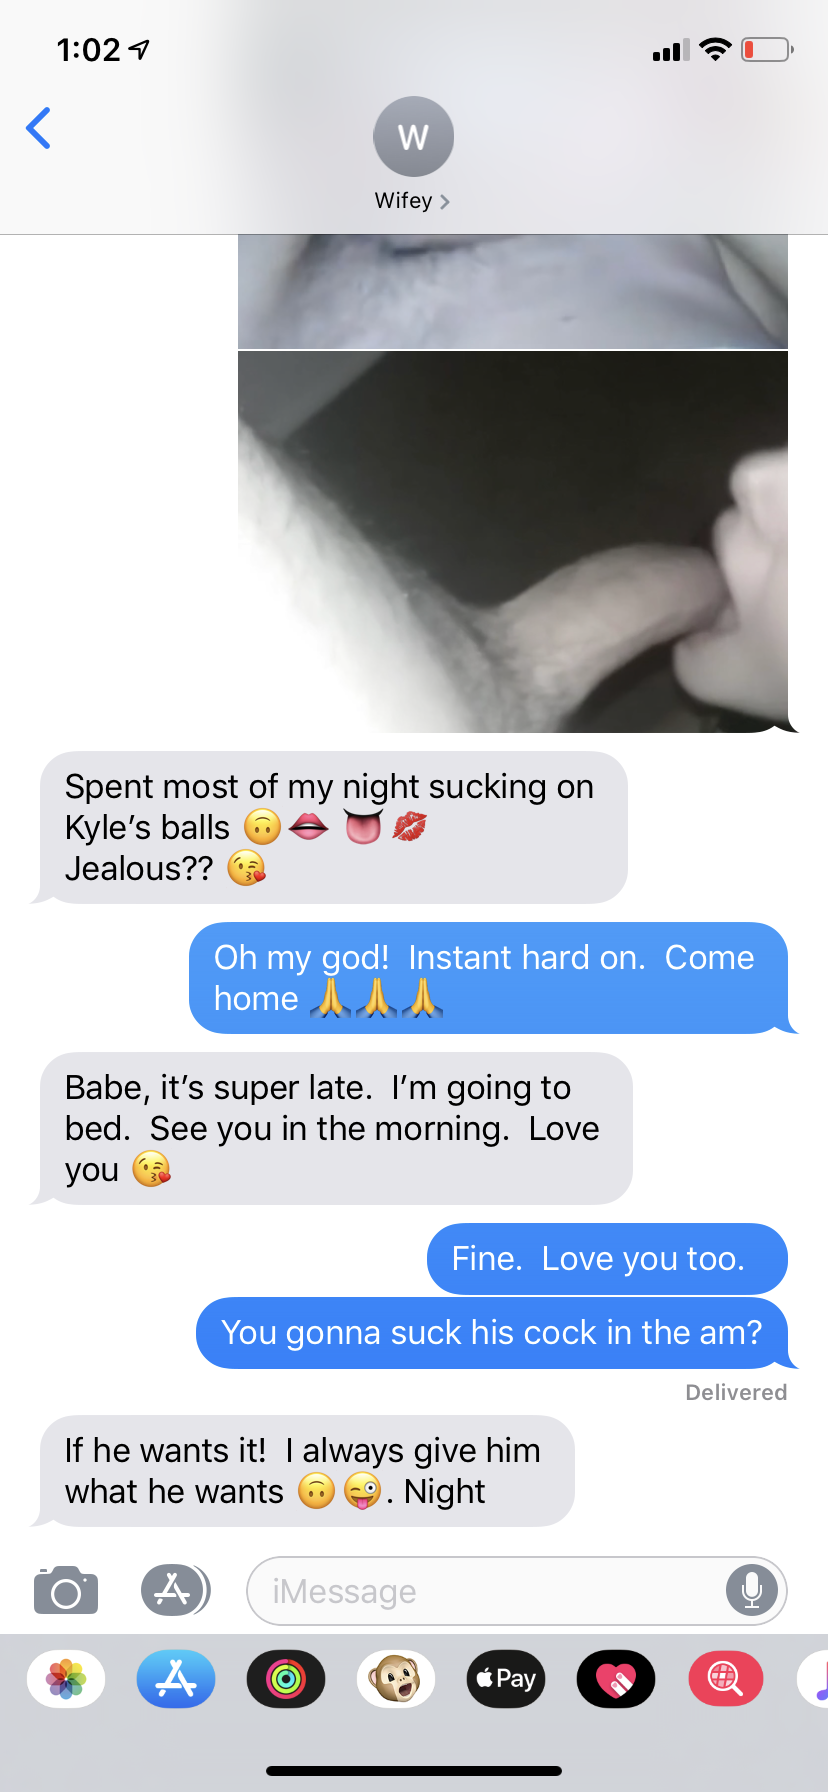 Watch the Photo by Cmitch1436969 with the username @Cmitch1436969, posted on June 27, 2019. The post is about the topic Hotwife. and the text says 'Let’s just say I didn’t sleep much last night after receiving these texts.  Kyle is the 23 yo college guy she regularly fucks'